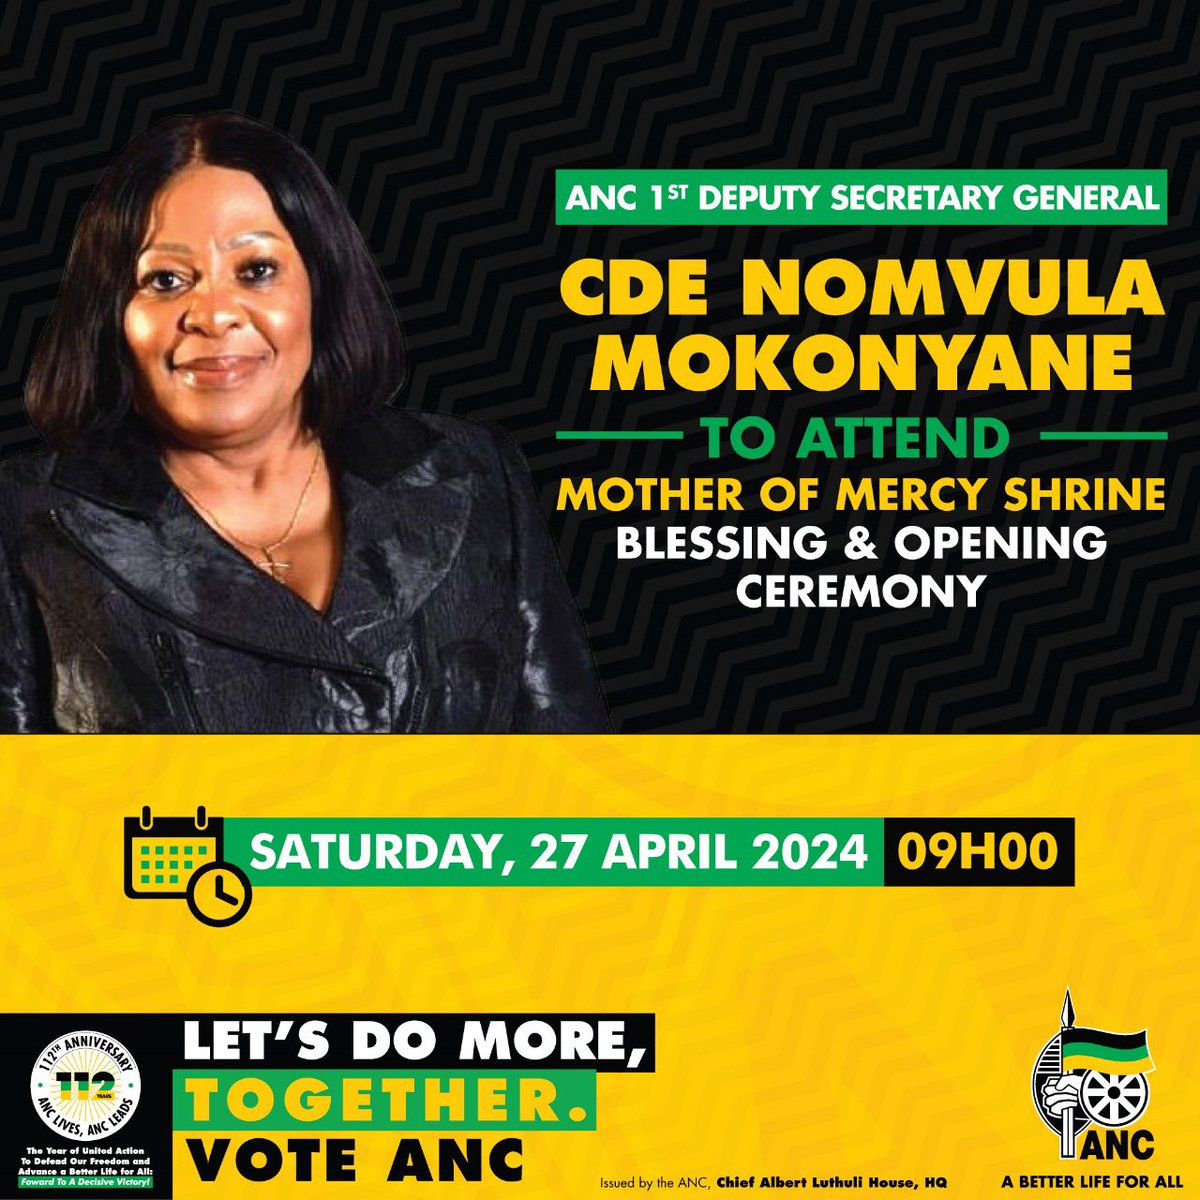 As part of sectoral work , today we will be taking part of the blessing and opening ceremony of the mother of mercy shrine. 
#ANCInChurch
#VoteANC2024 
#LetsDoMoreTogether